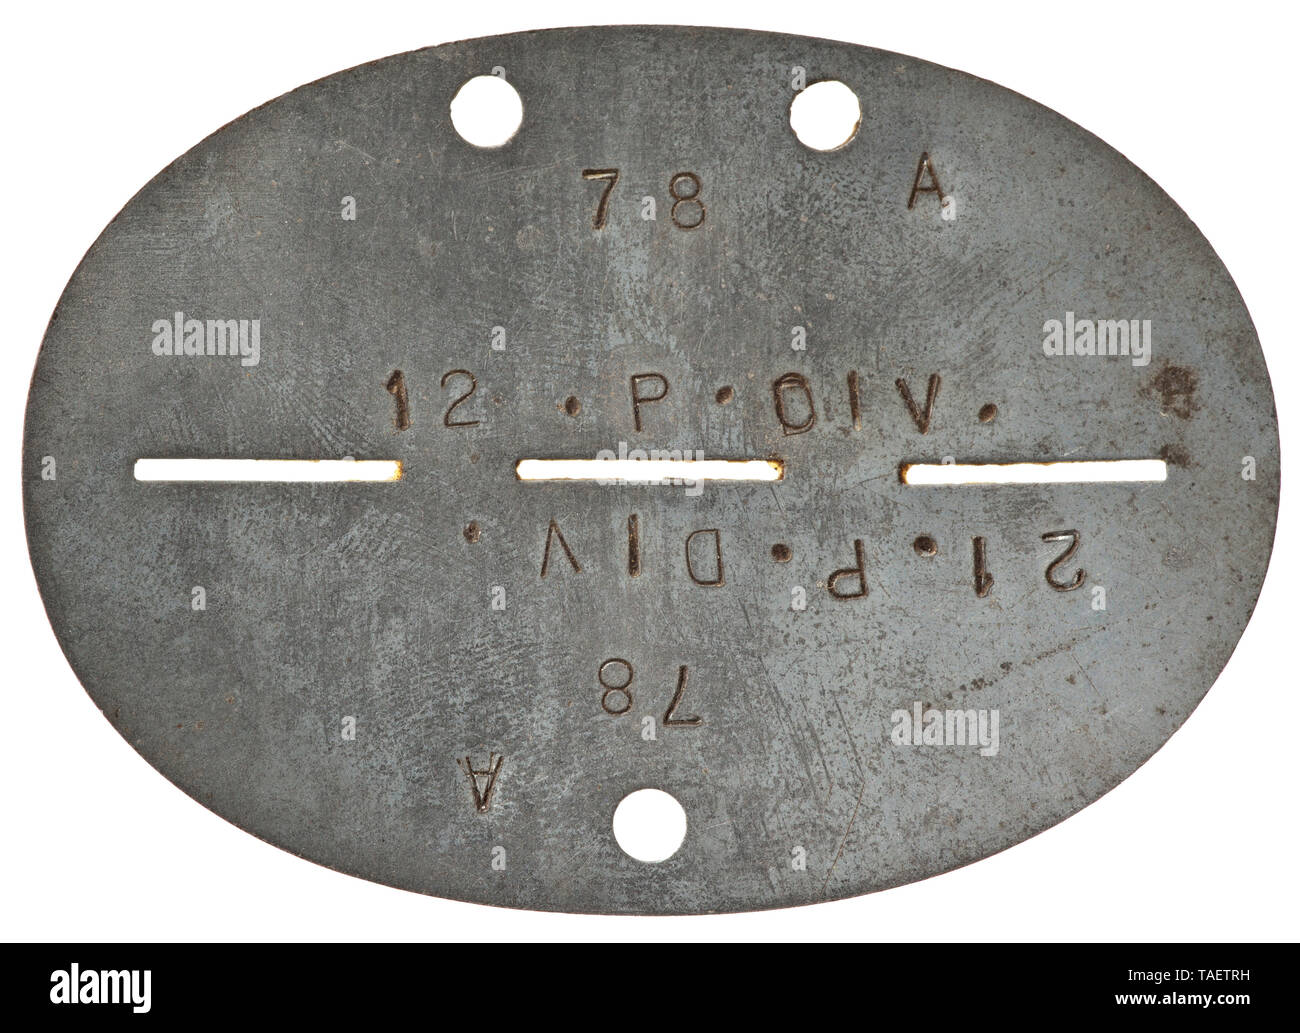 An identification tag for 21st Panzer division Eisenblech (leicht migriert) mit vs. Bezeichnung "A 78 21.P.Div.", rs. ohne Markung. historic, historical, 20th century, Editorial-Use-Only Stock Photo